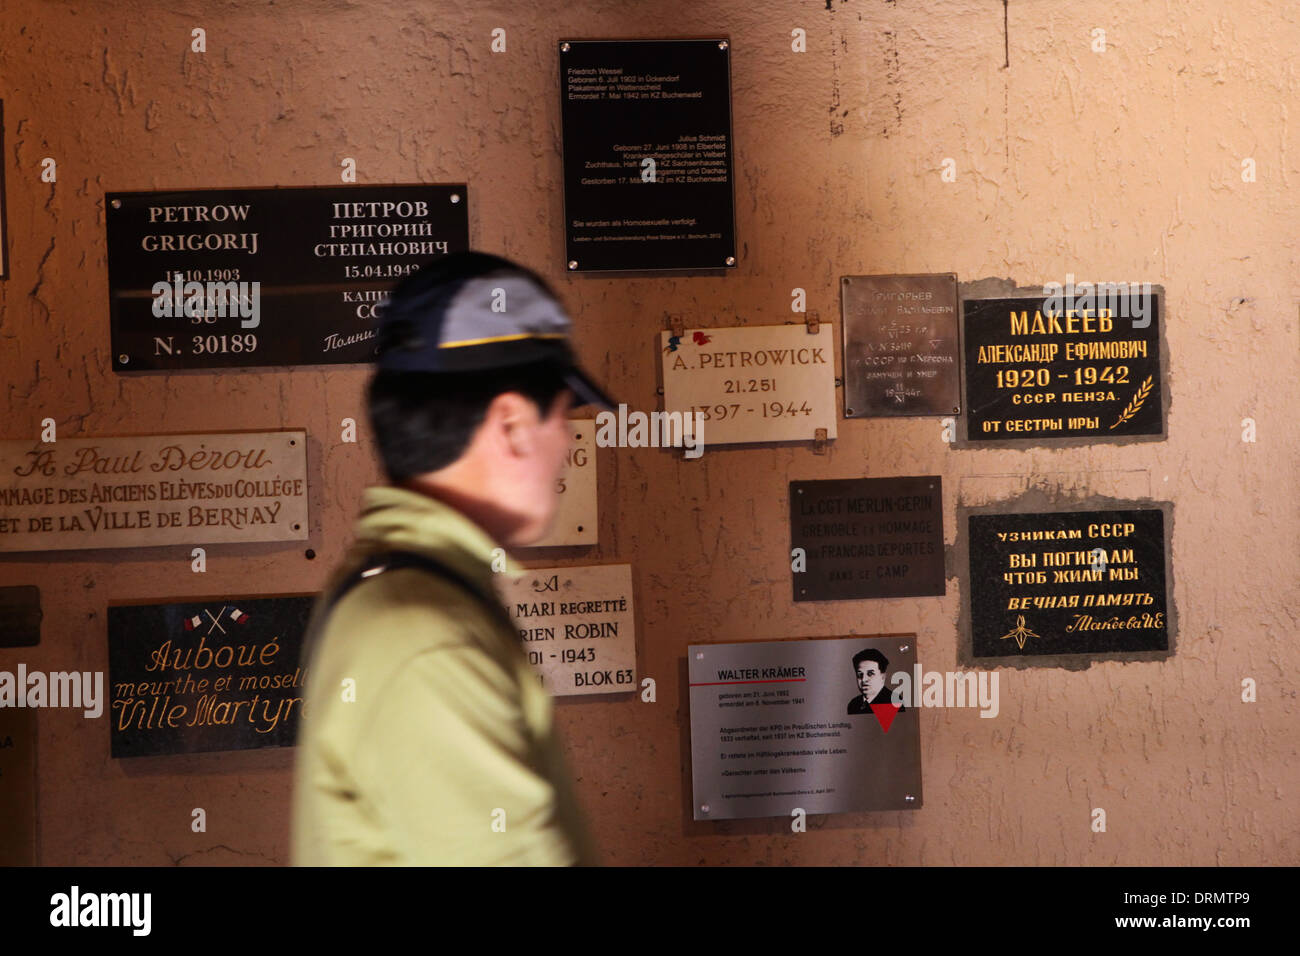 Commemorative plaques in remembrance of victims in the crematorium in Buchenwald concentration camp near Weimar, Germany. Stock Photo